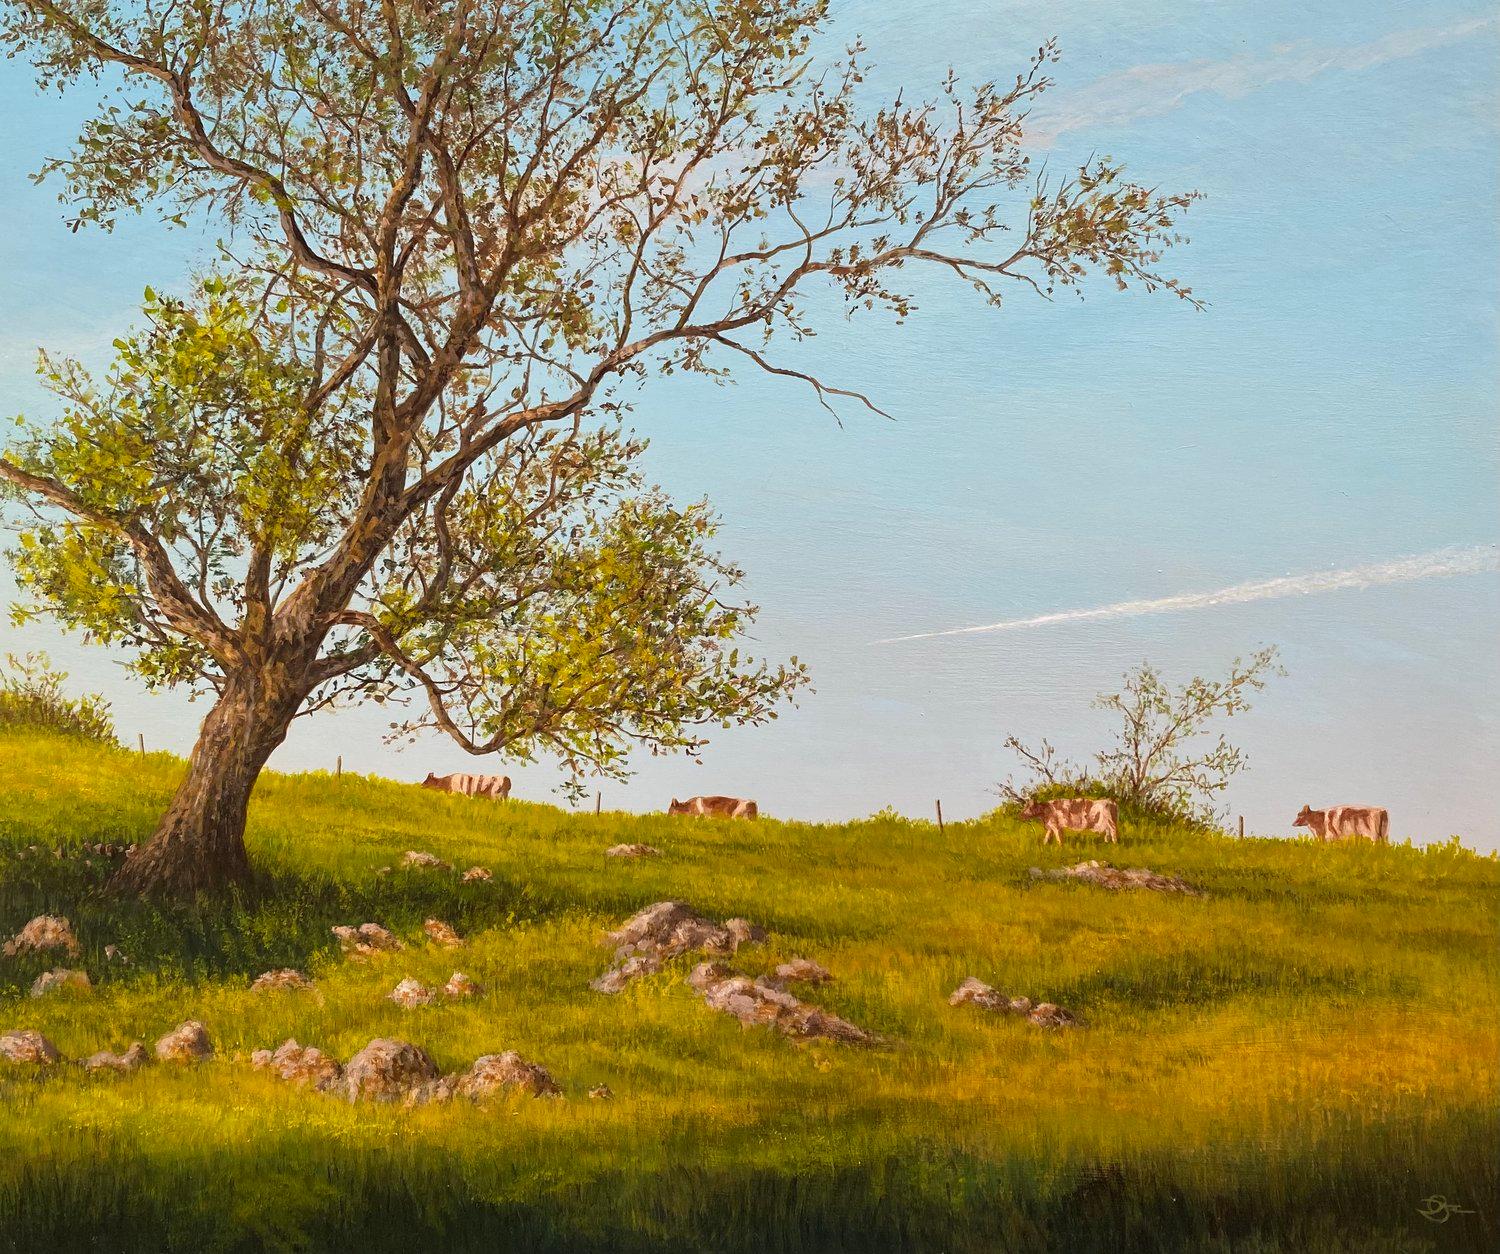 Del Bourree Bach, "Afternoon Parade", Rural Country Cow Pasture Landscape 